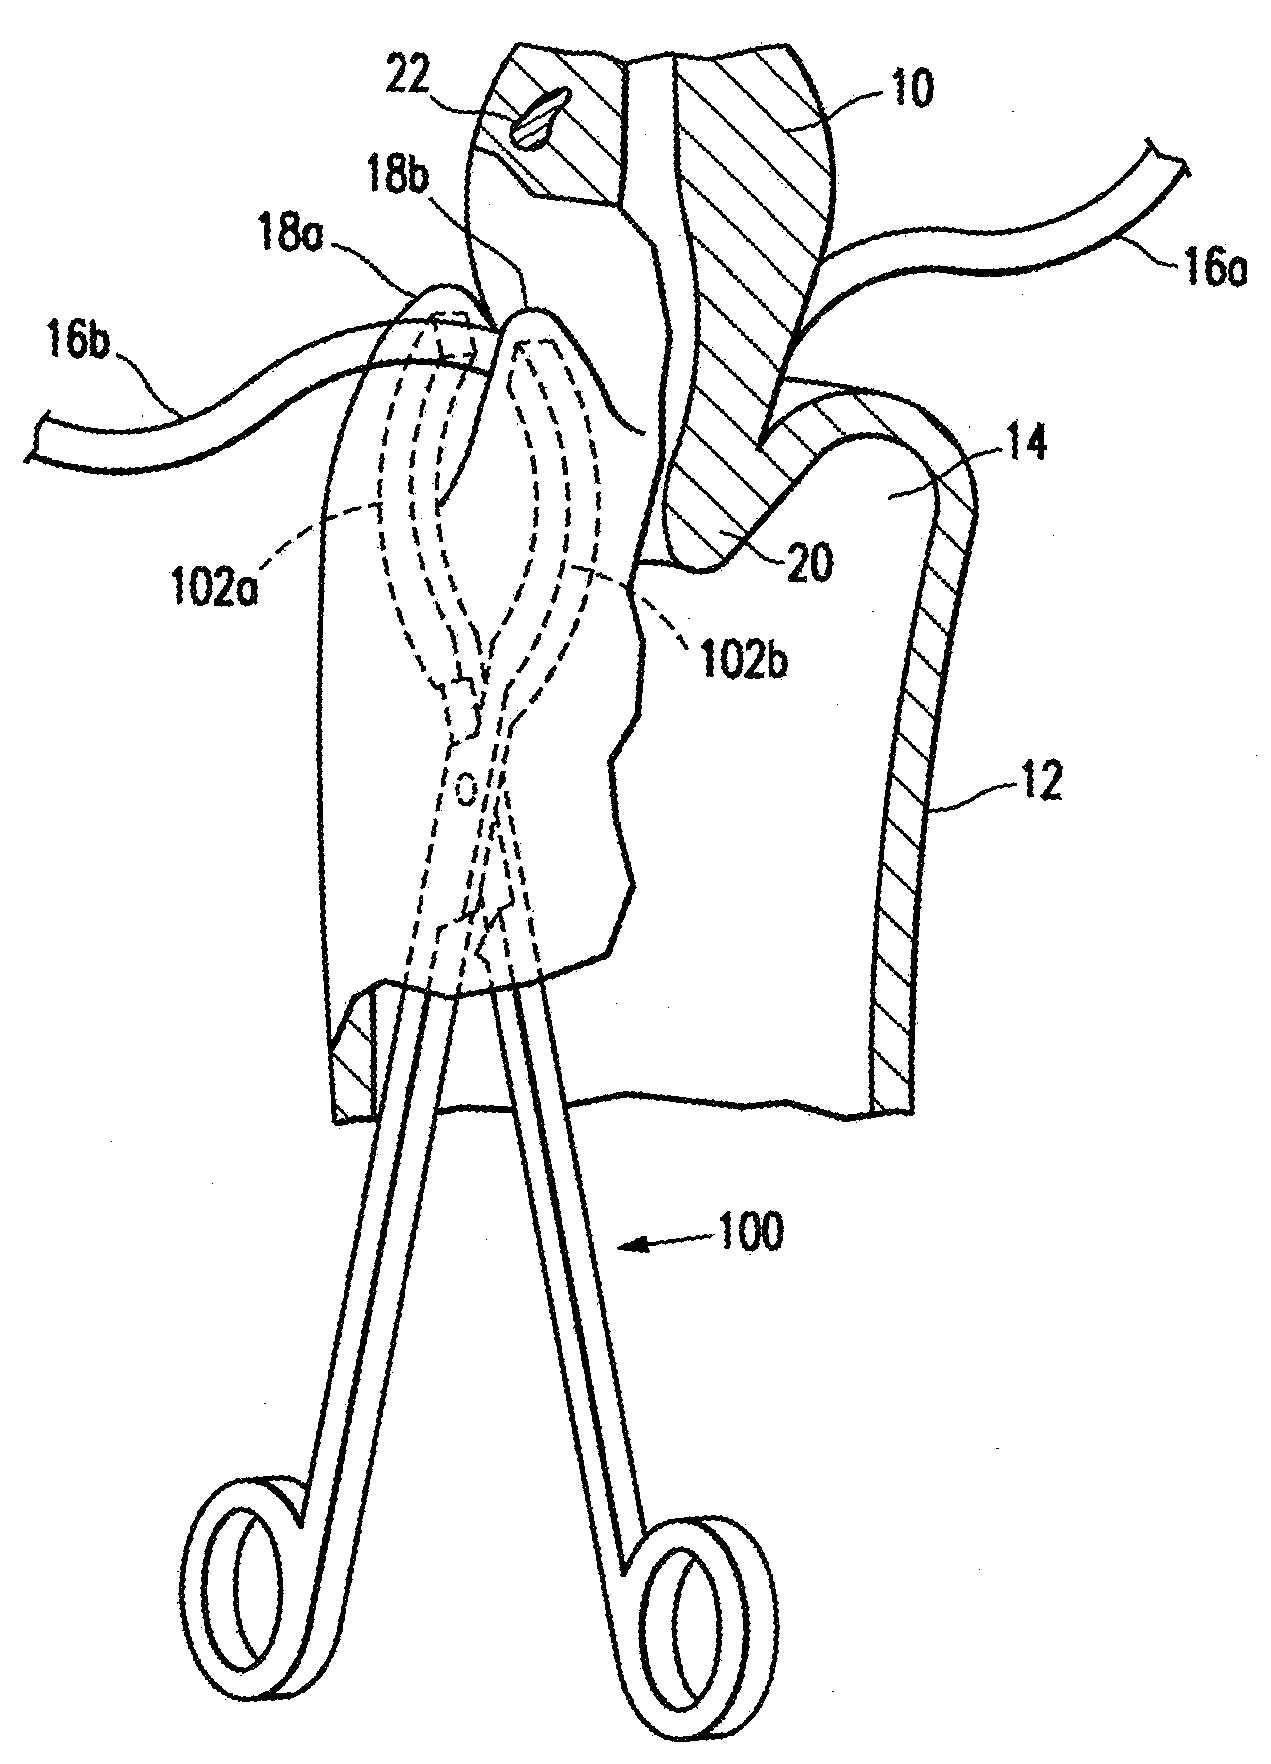 Methods for minimally invasive, non-permanent occlusion of a uterine artery